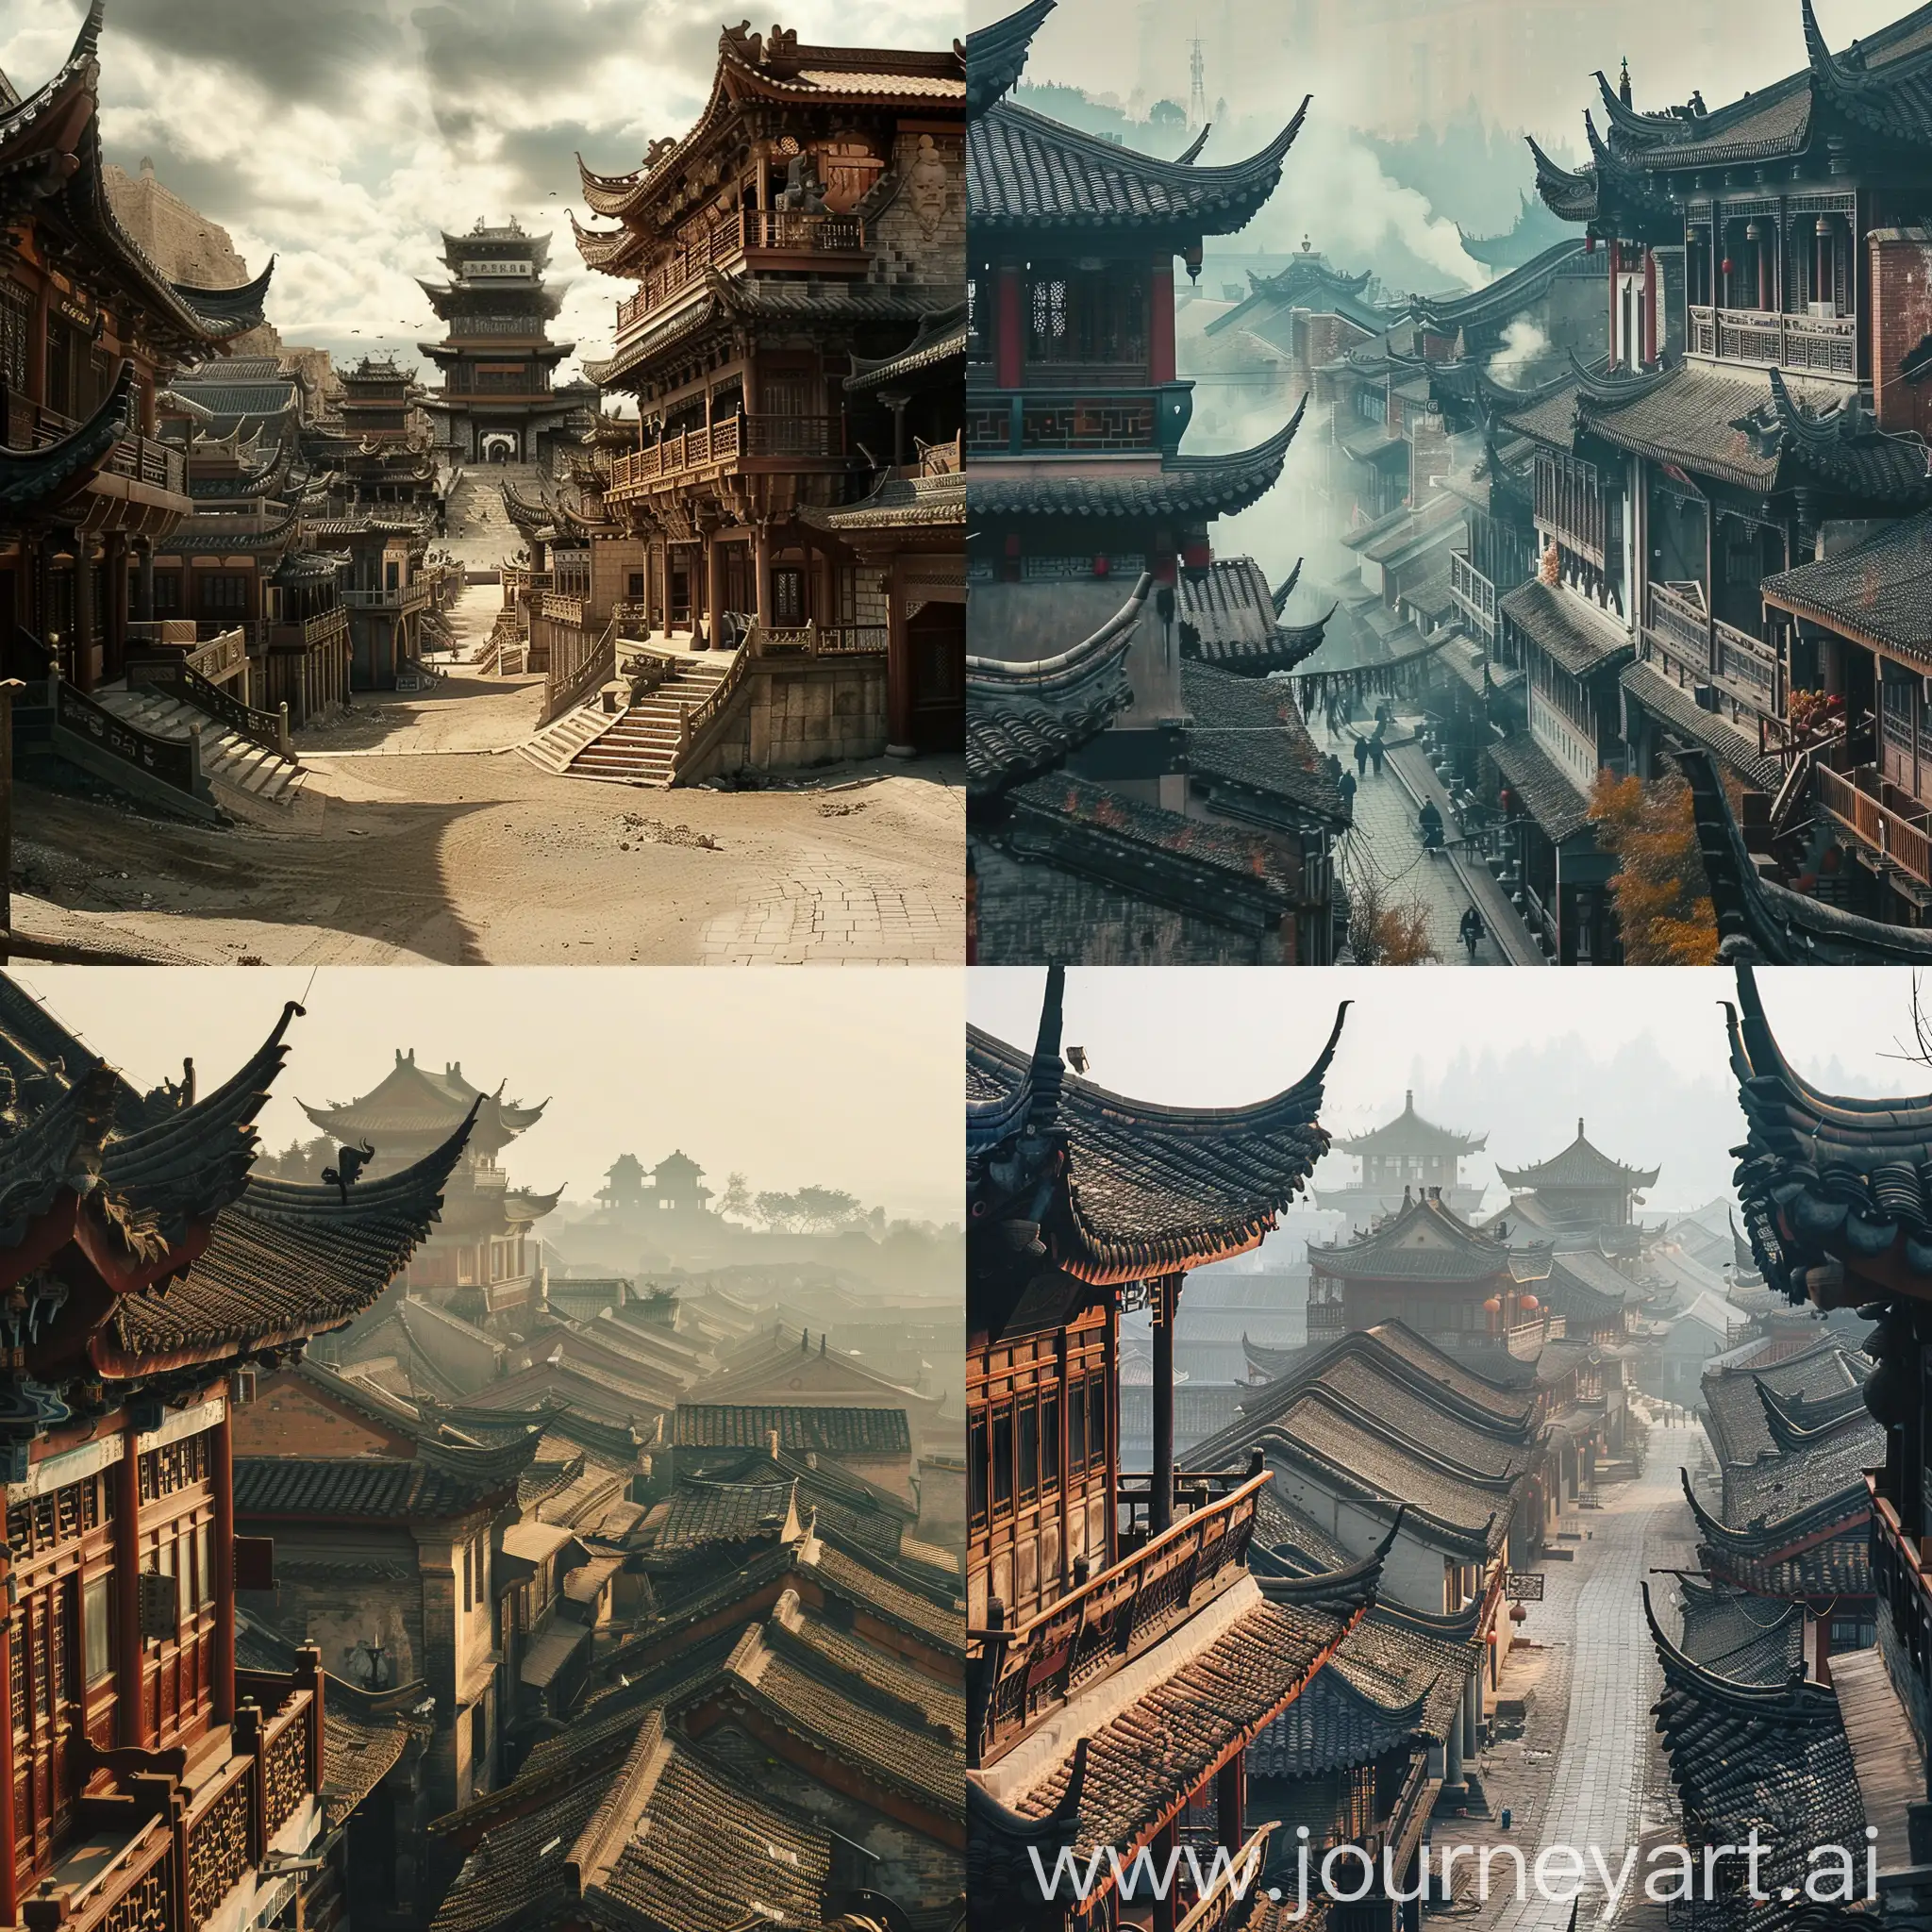 Ancient-Chinese-City-Majestic-Buildings-and-Stilted-Cornices-in-11-Aspect-Ratio